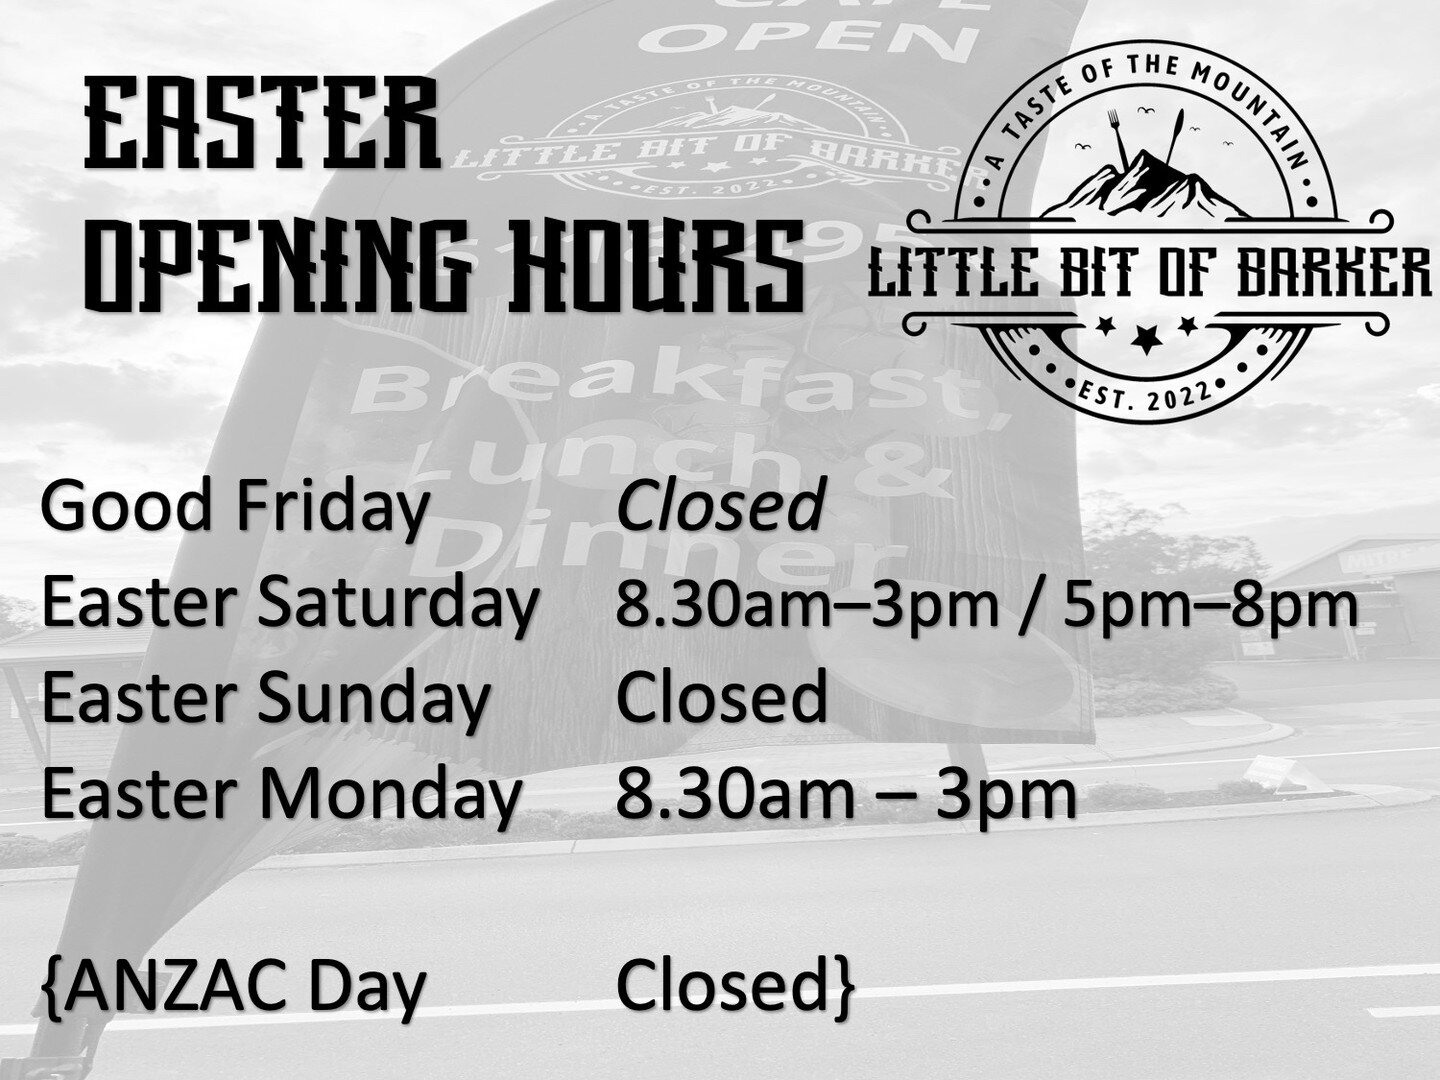 Easter Opening hours! 🙌🏻 Easter #doneright #openmonday
#mountbarkerwa #mountaincountrywa